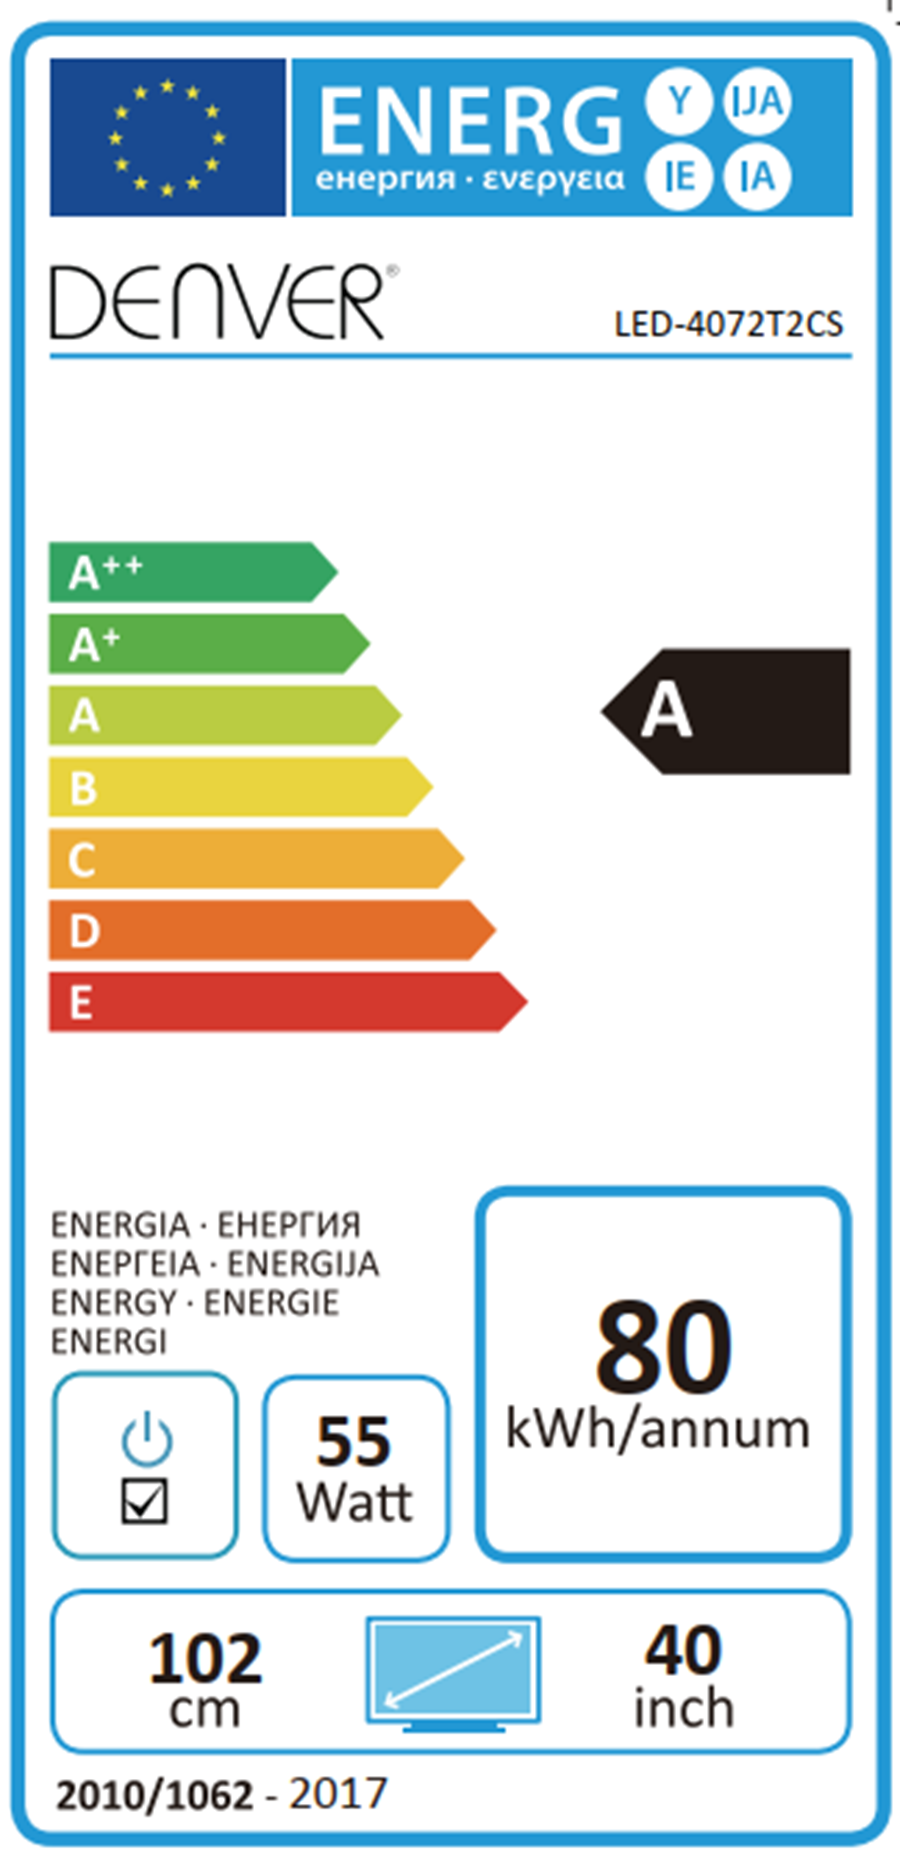 LED-4072 Energy label.png